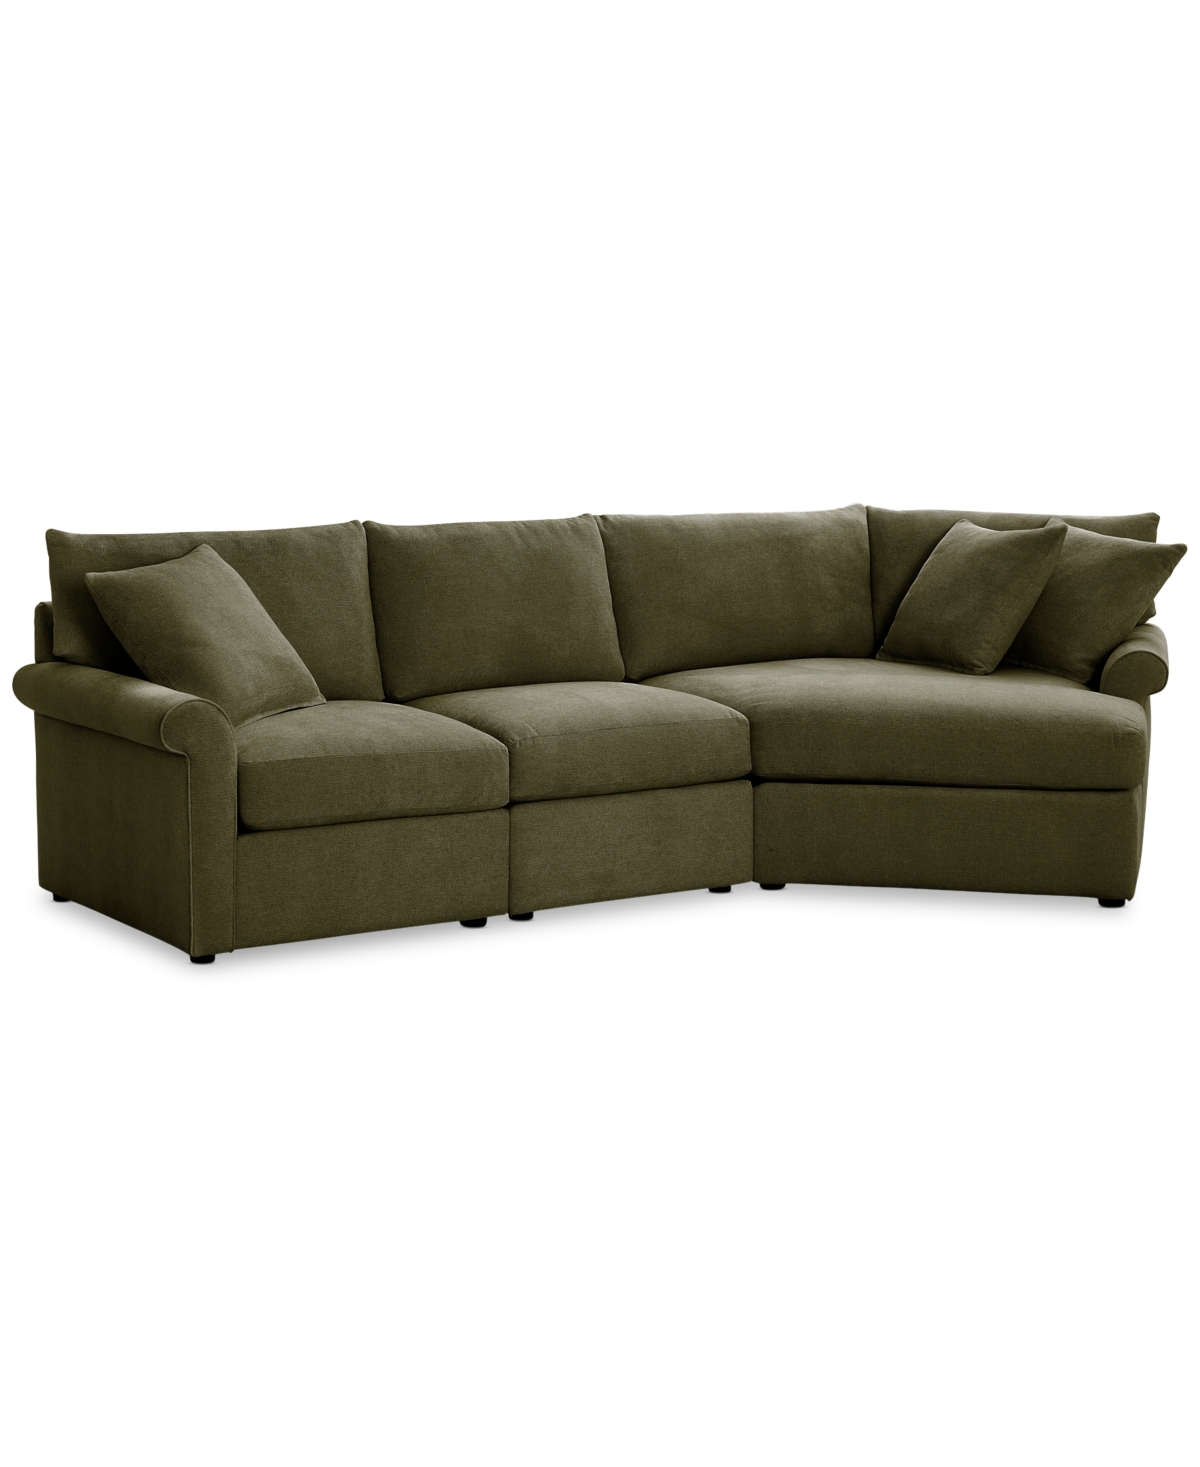 Furniture Wrenley 131" 3-pc. Fabric Modular Cuddler Chaise Sectional Sofa, Created For Macy's In Olive